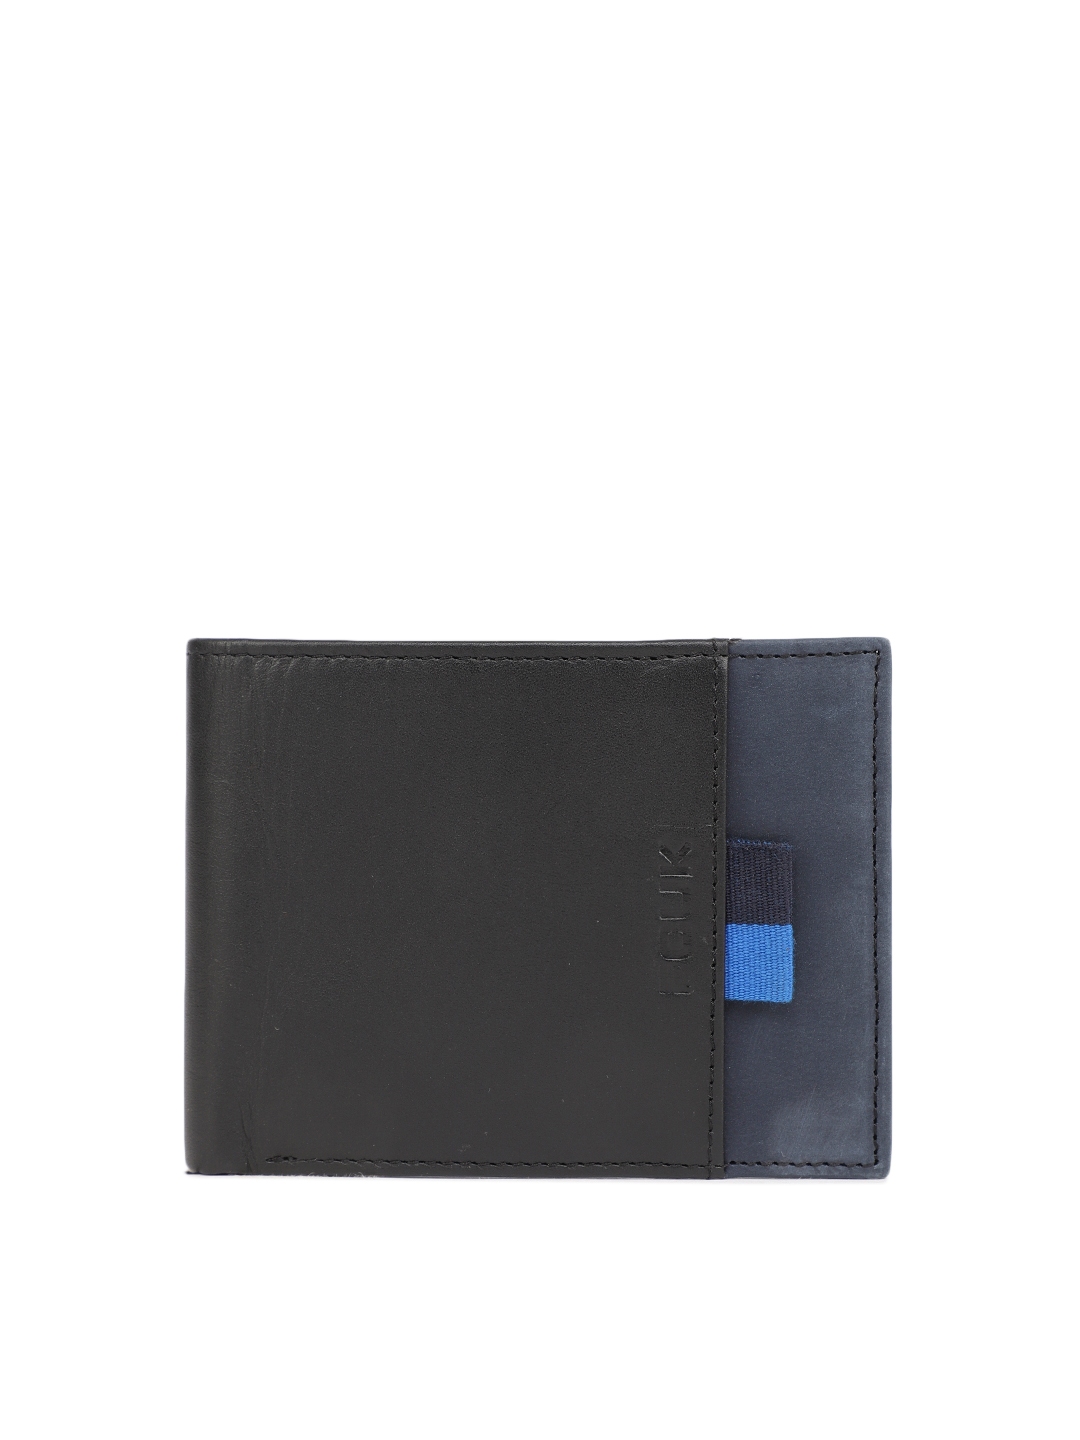 Buy French Connection Men Black & Navy Solid Two Fold Wallet - Wallets ...